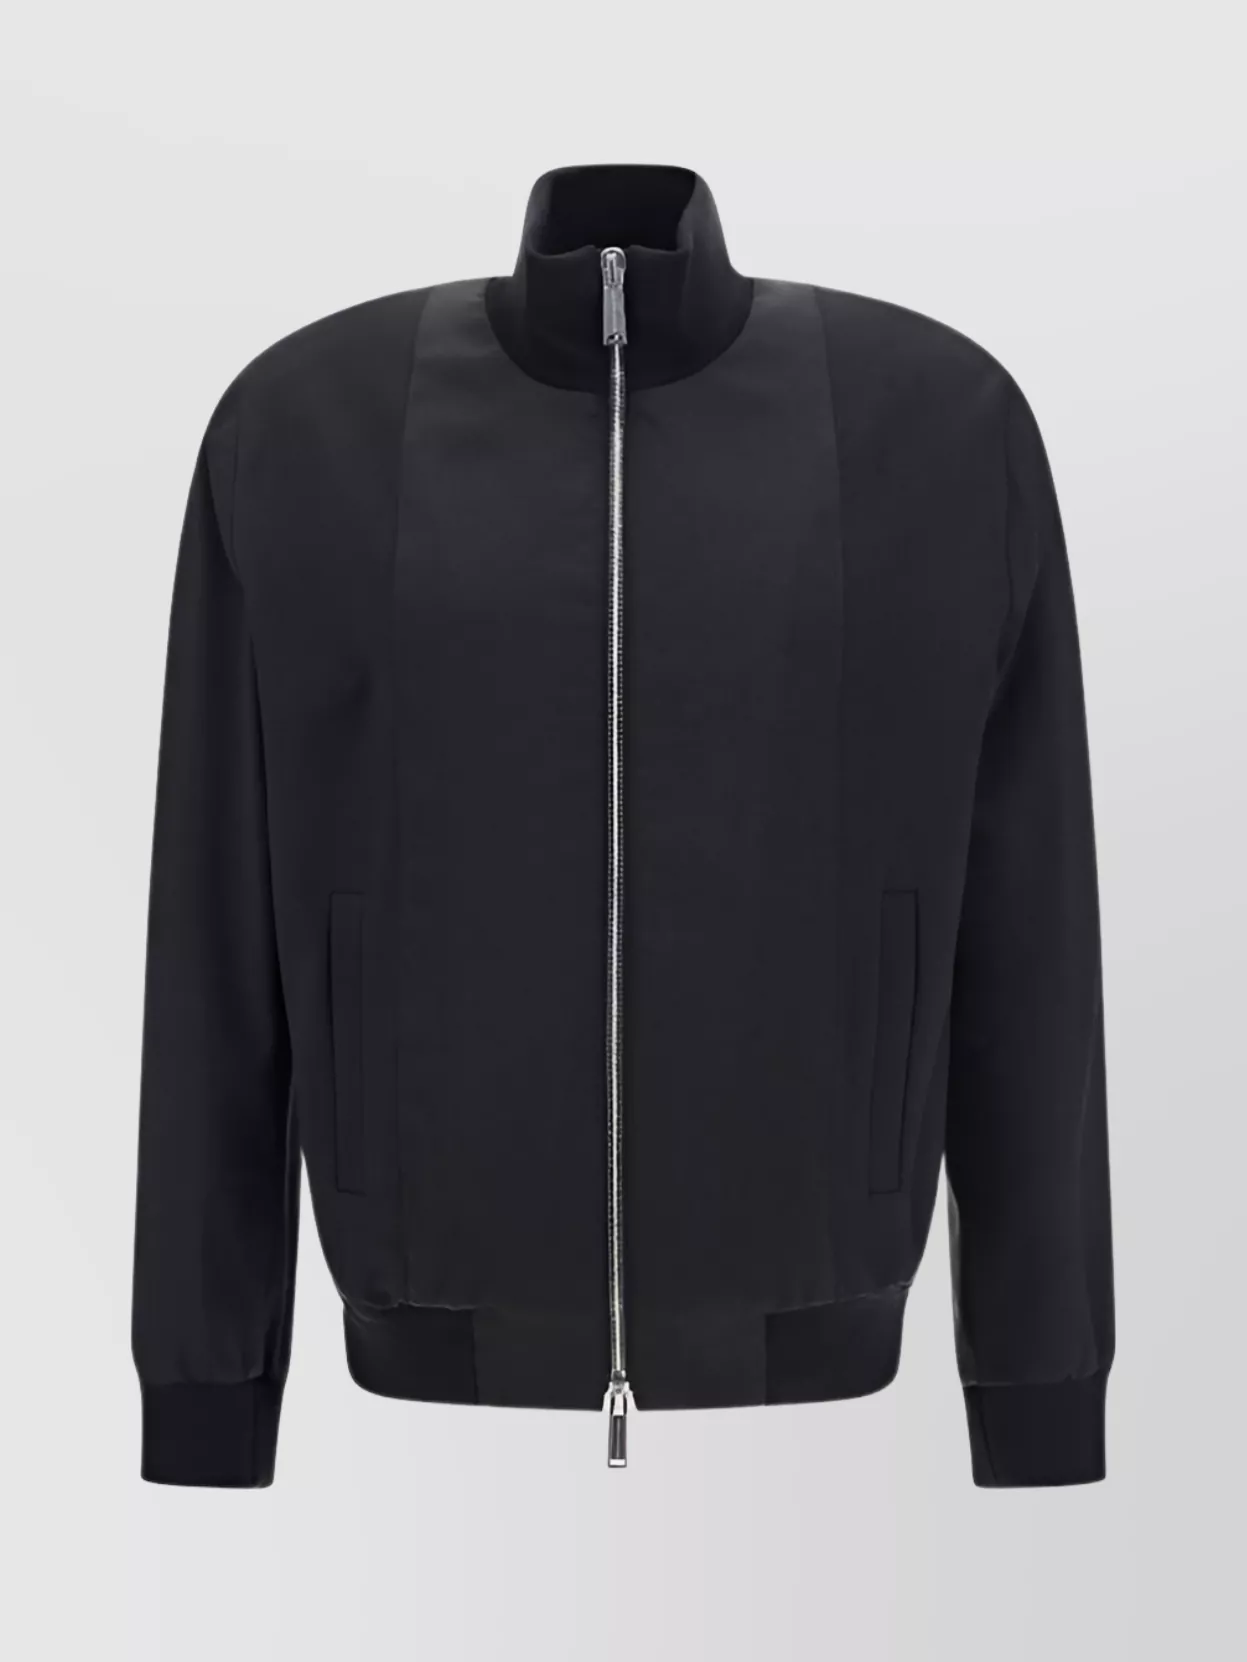 Dsquared2 Wool Jacket With Elasticized Cuffs And Hem In Black